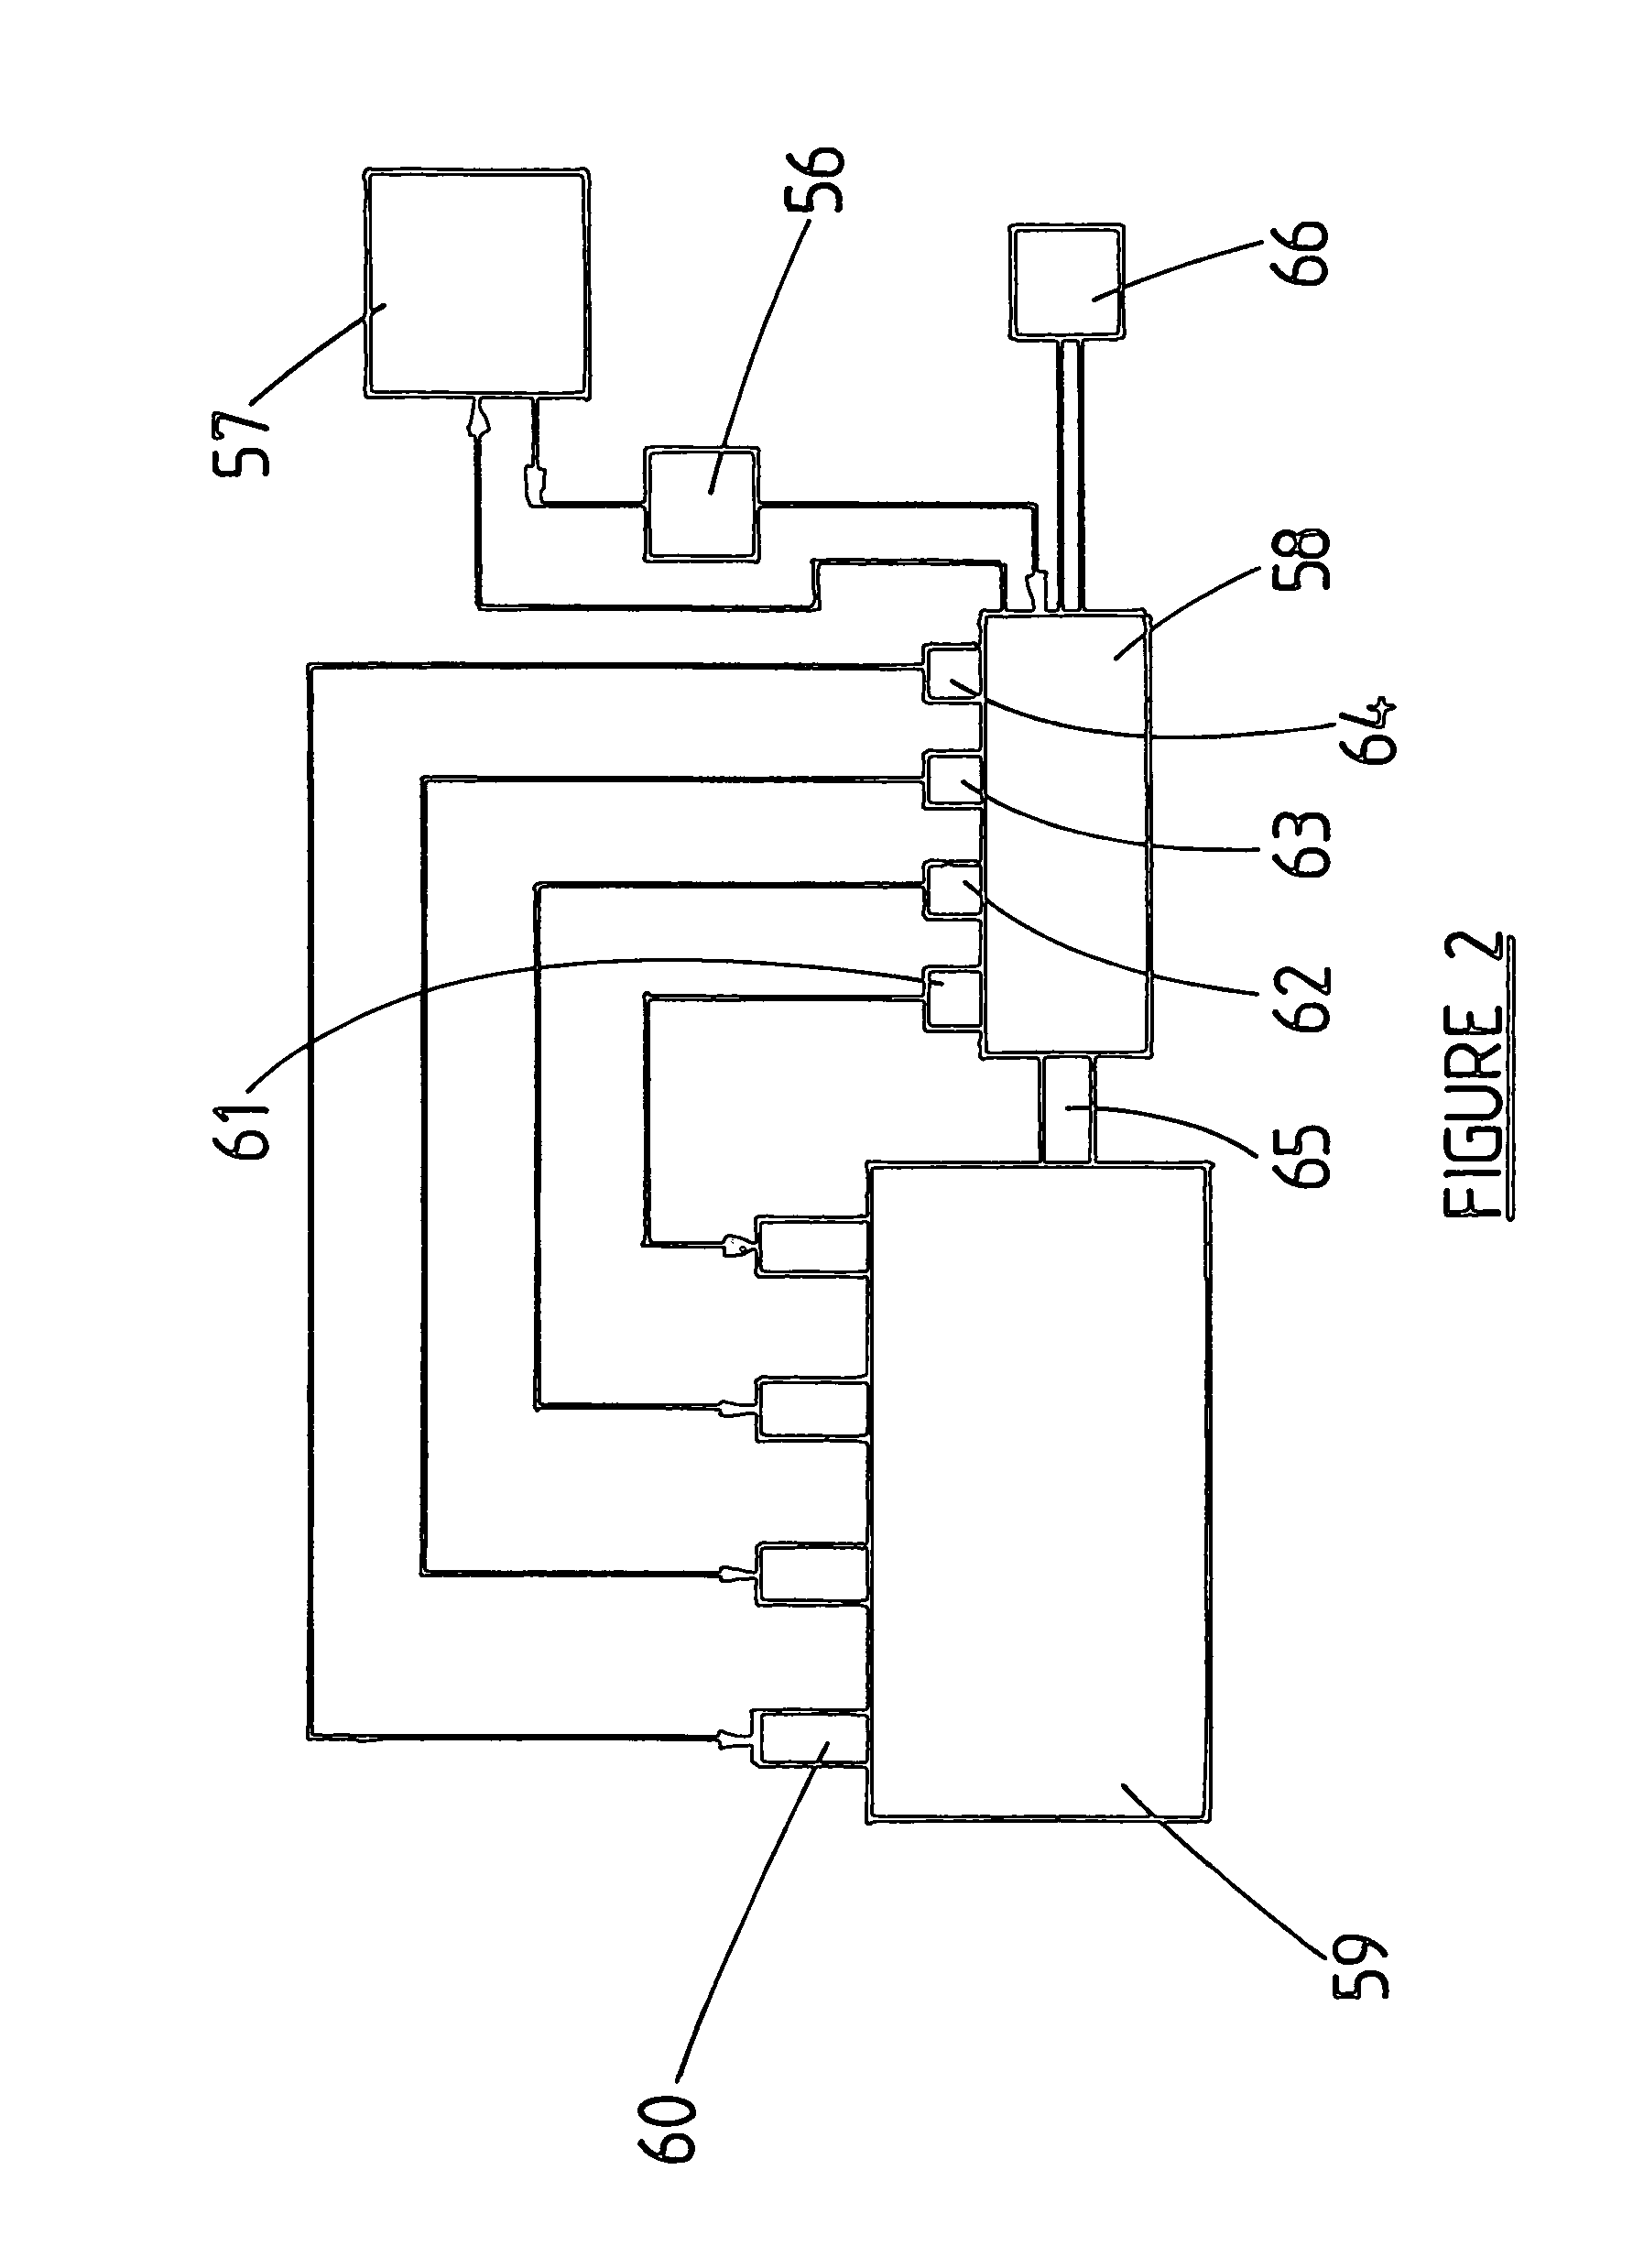 Separate igniter fuel injection system